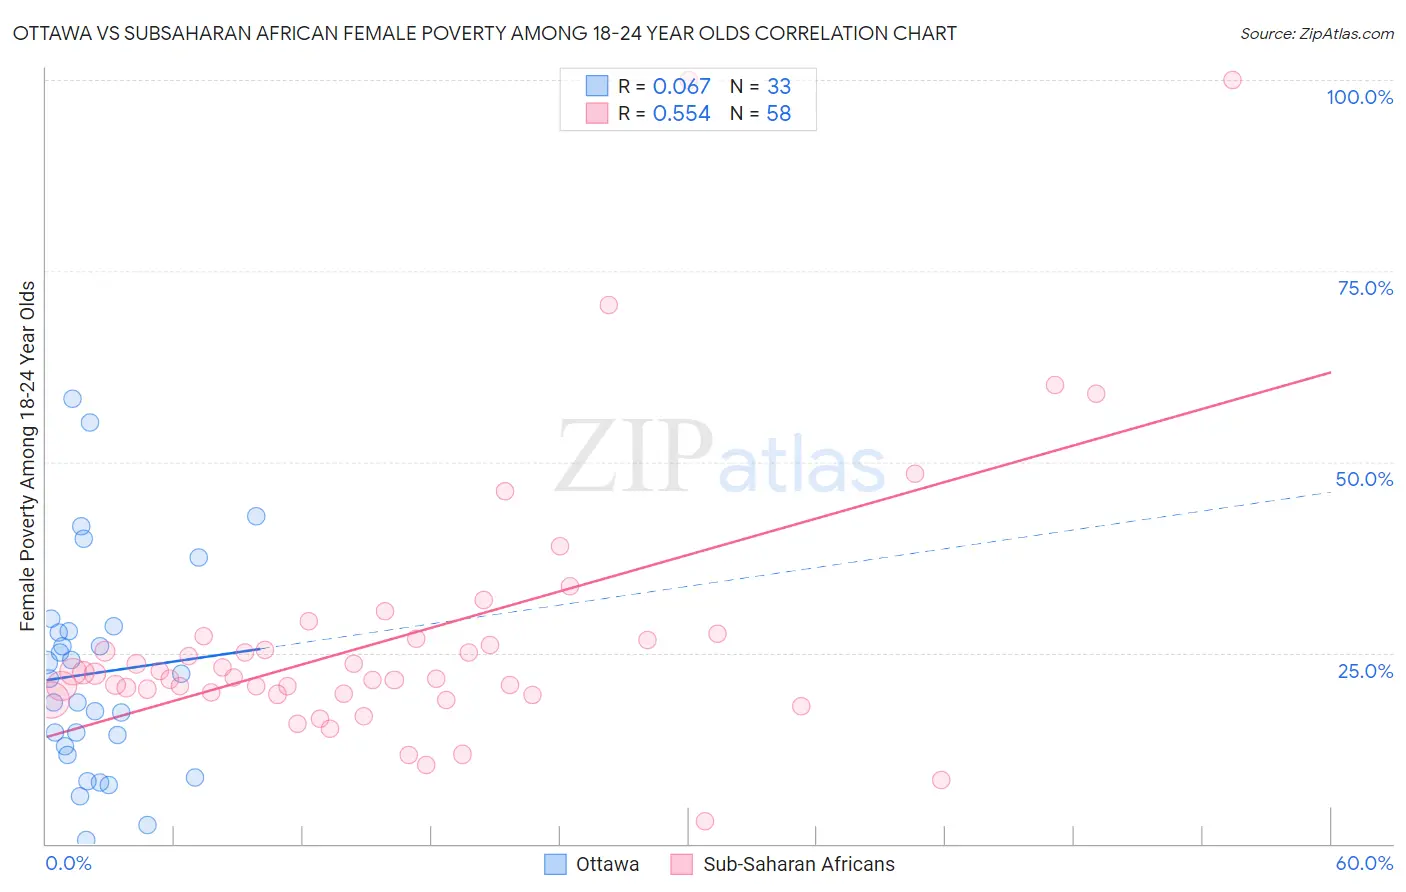 Ottawa vs Subsaharan African Female Poverty Among 18-24 Year Olds